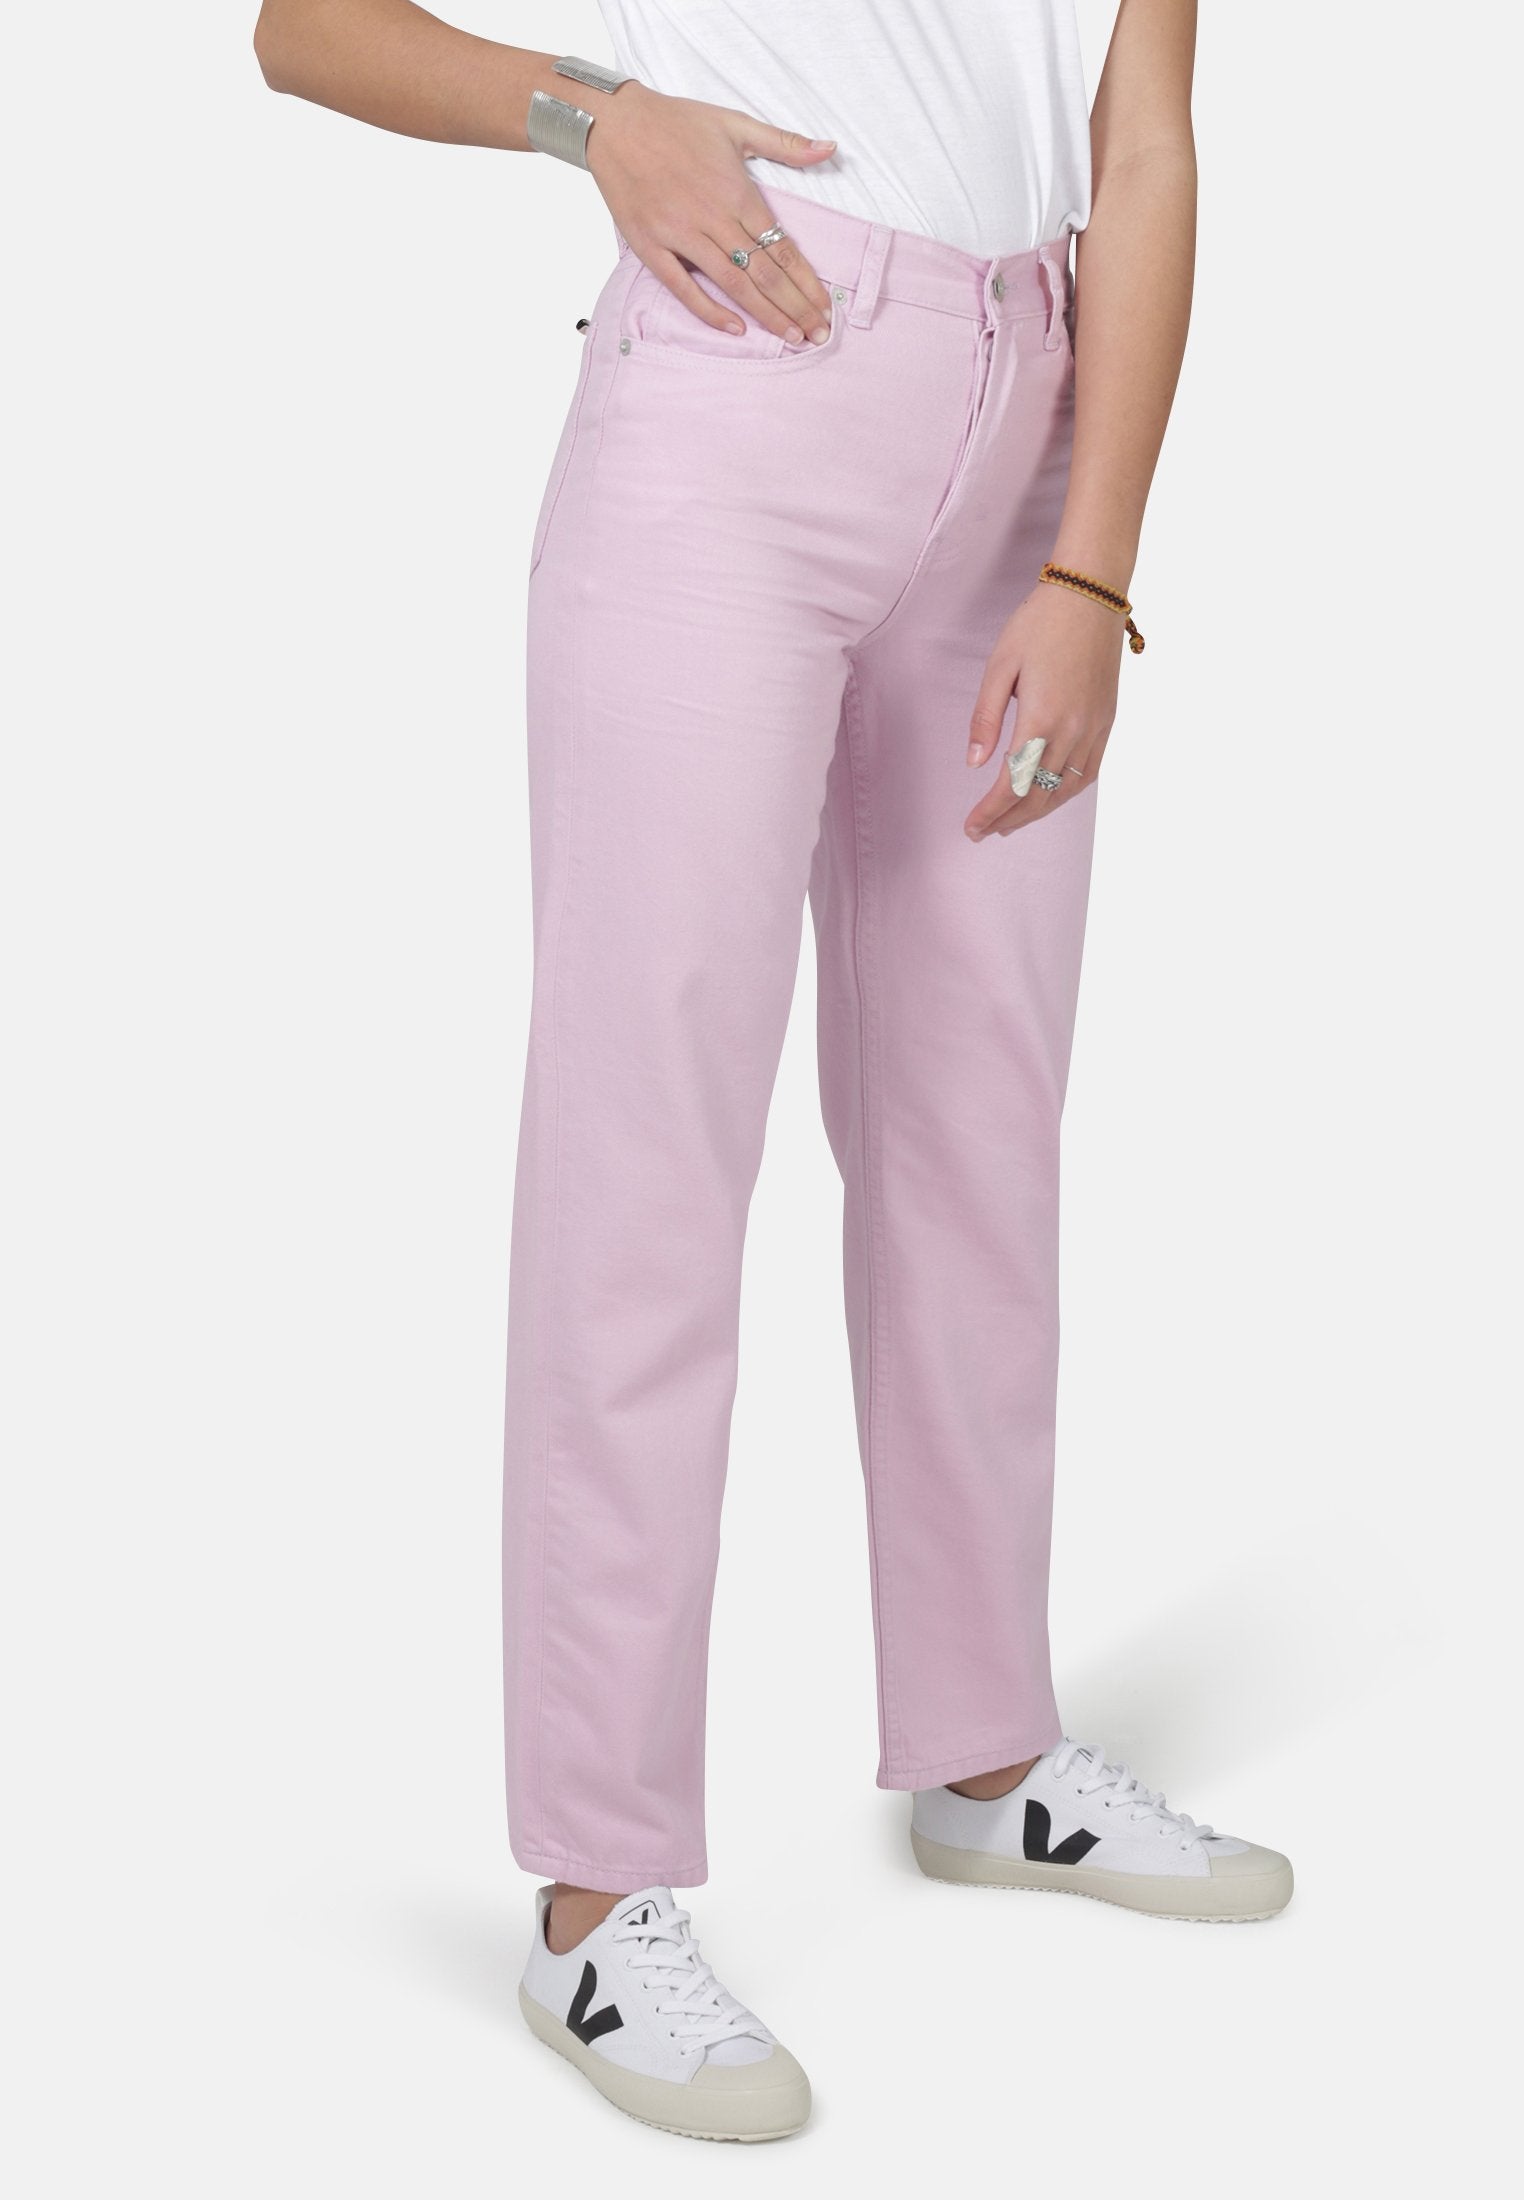 Libby Straight Jean in Pink